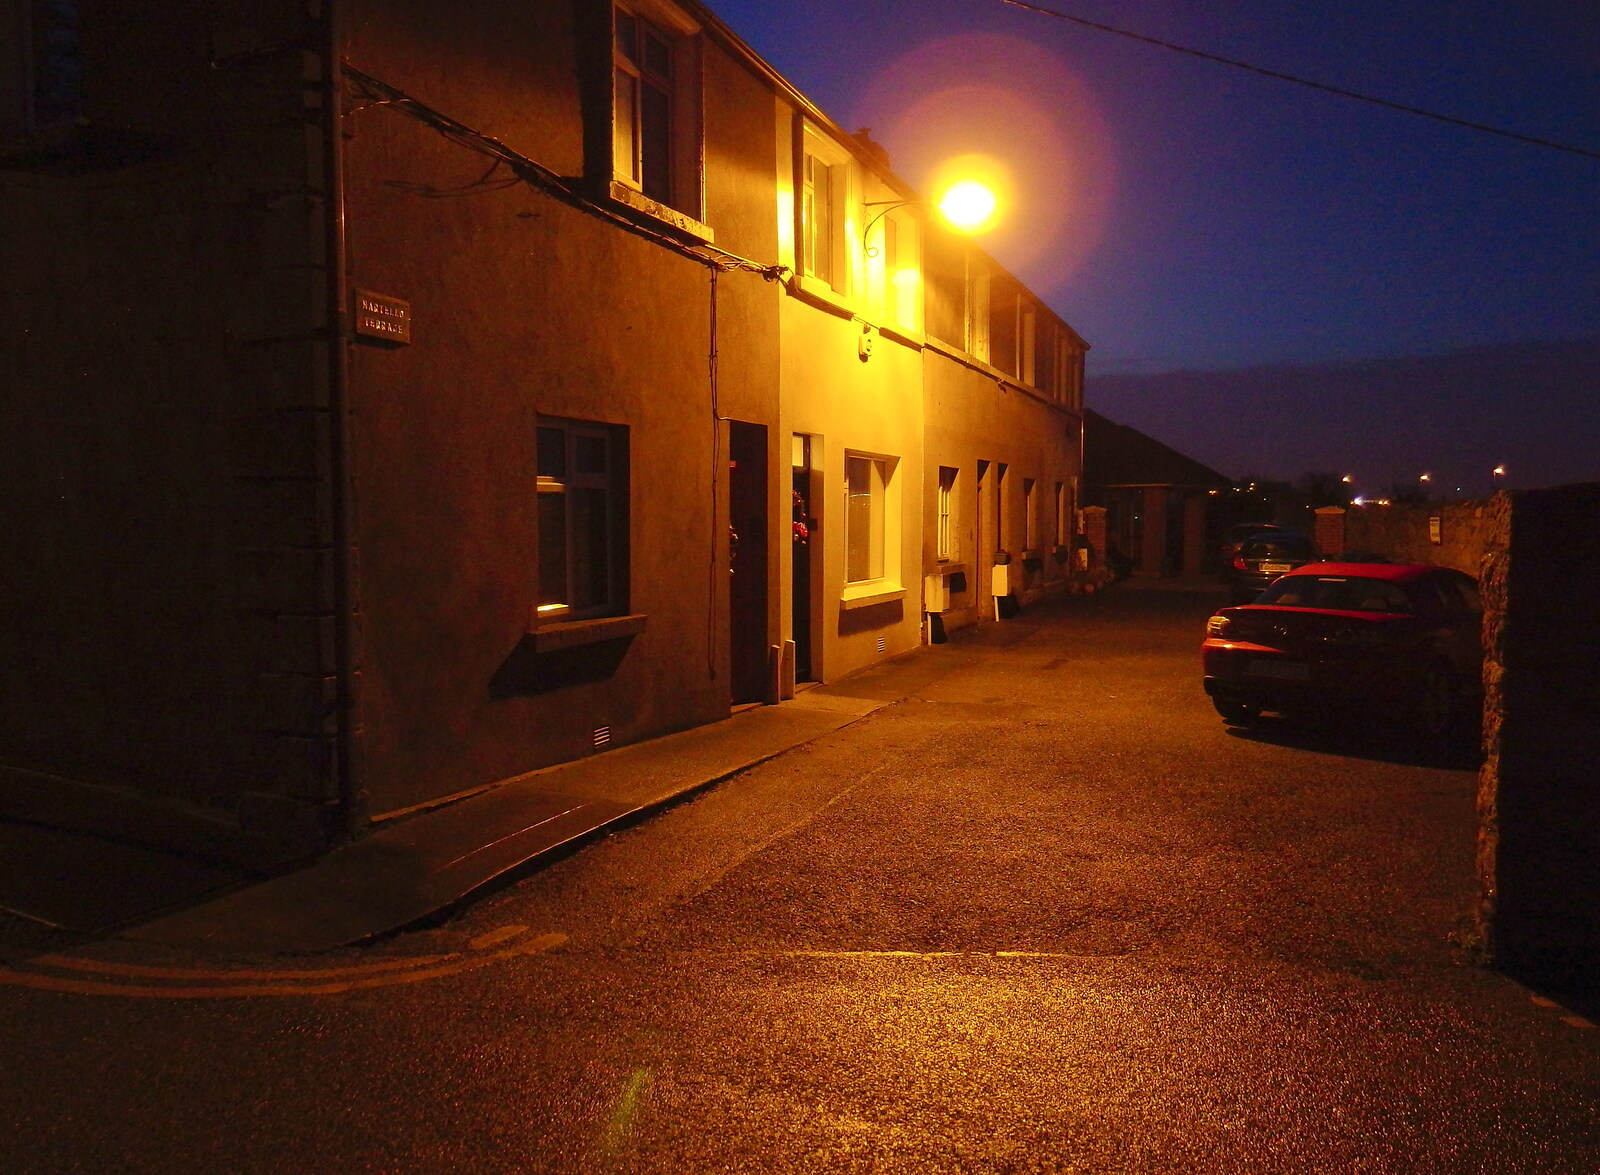 A sodium-lit side street from Dun Laoghaire and an Electrical Disaster, Monkstown, County Dublin, Ireland - 4th January 2014